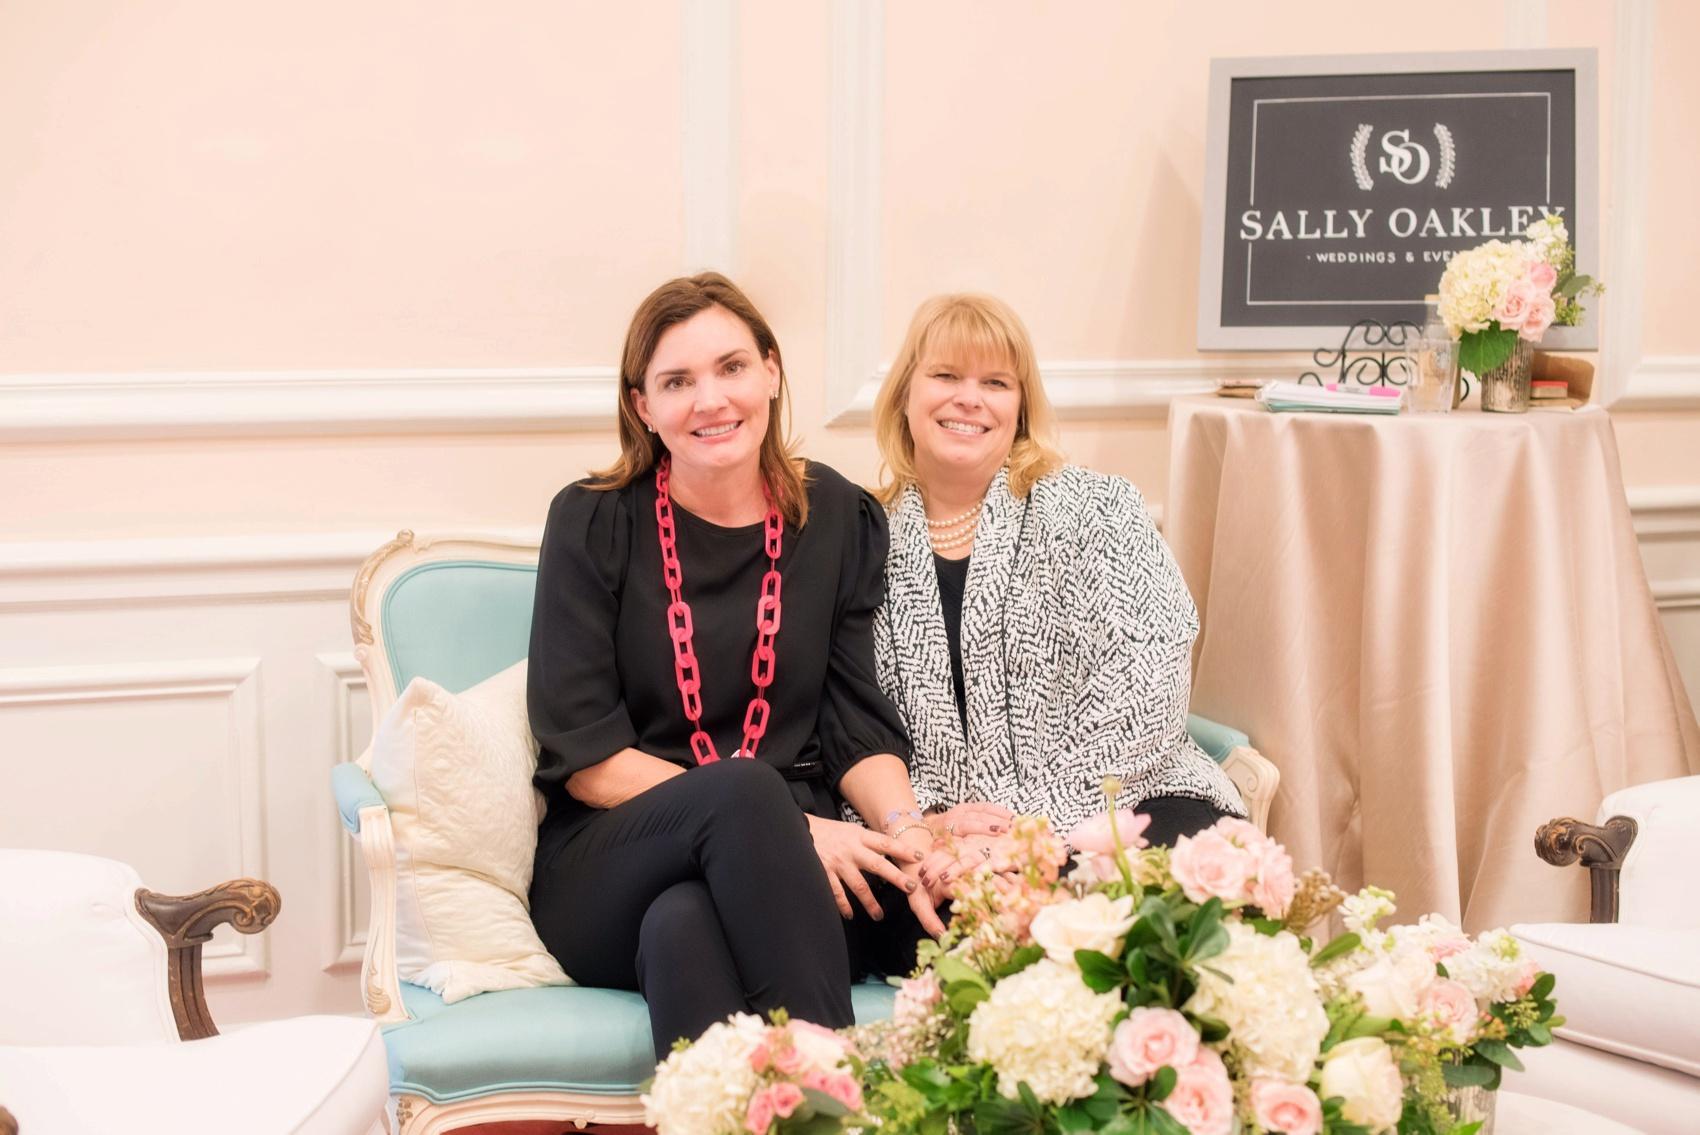 The Carolina Inn wedding photos - bridal showcase 2016. Mikkel Paige Photography captures the event with Sally Oakley Weddings and Events.